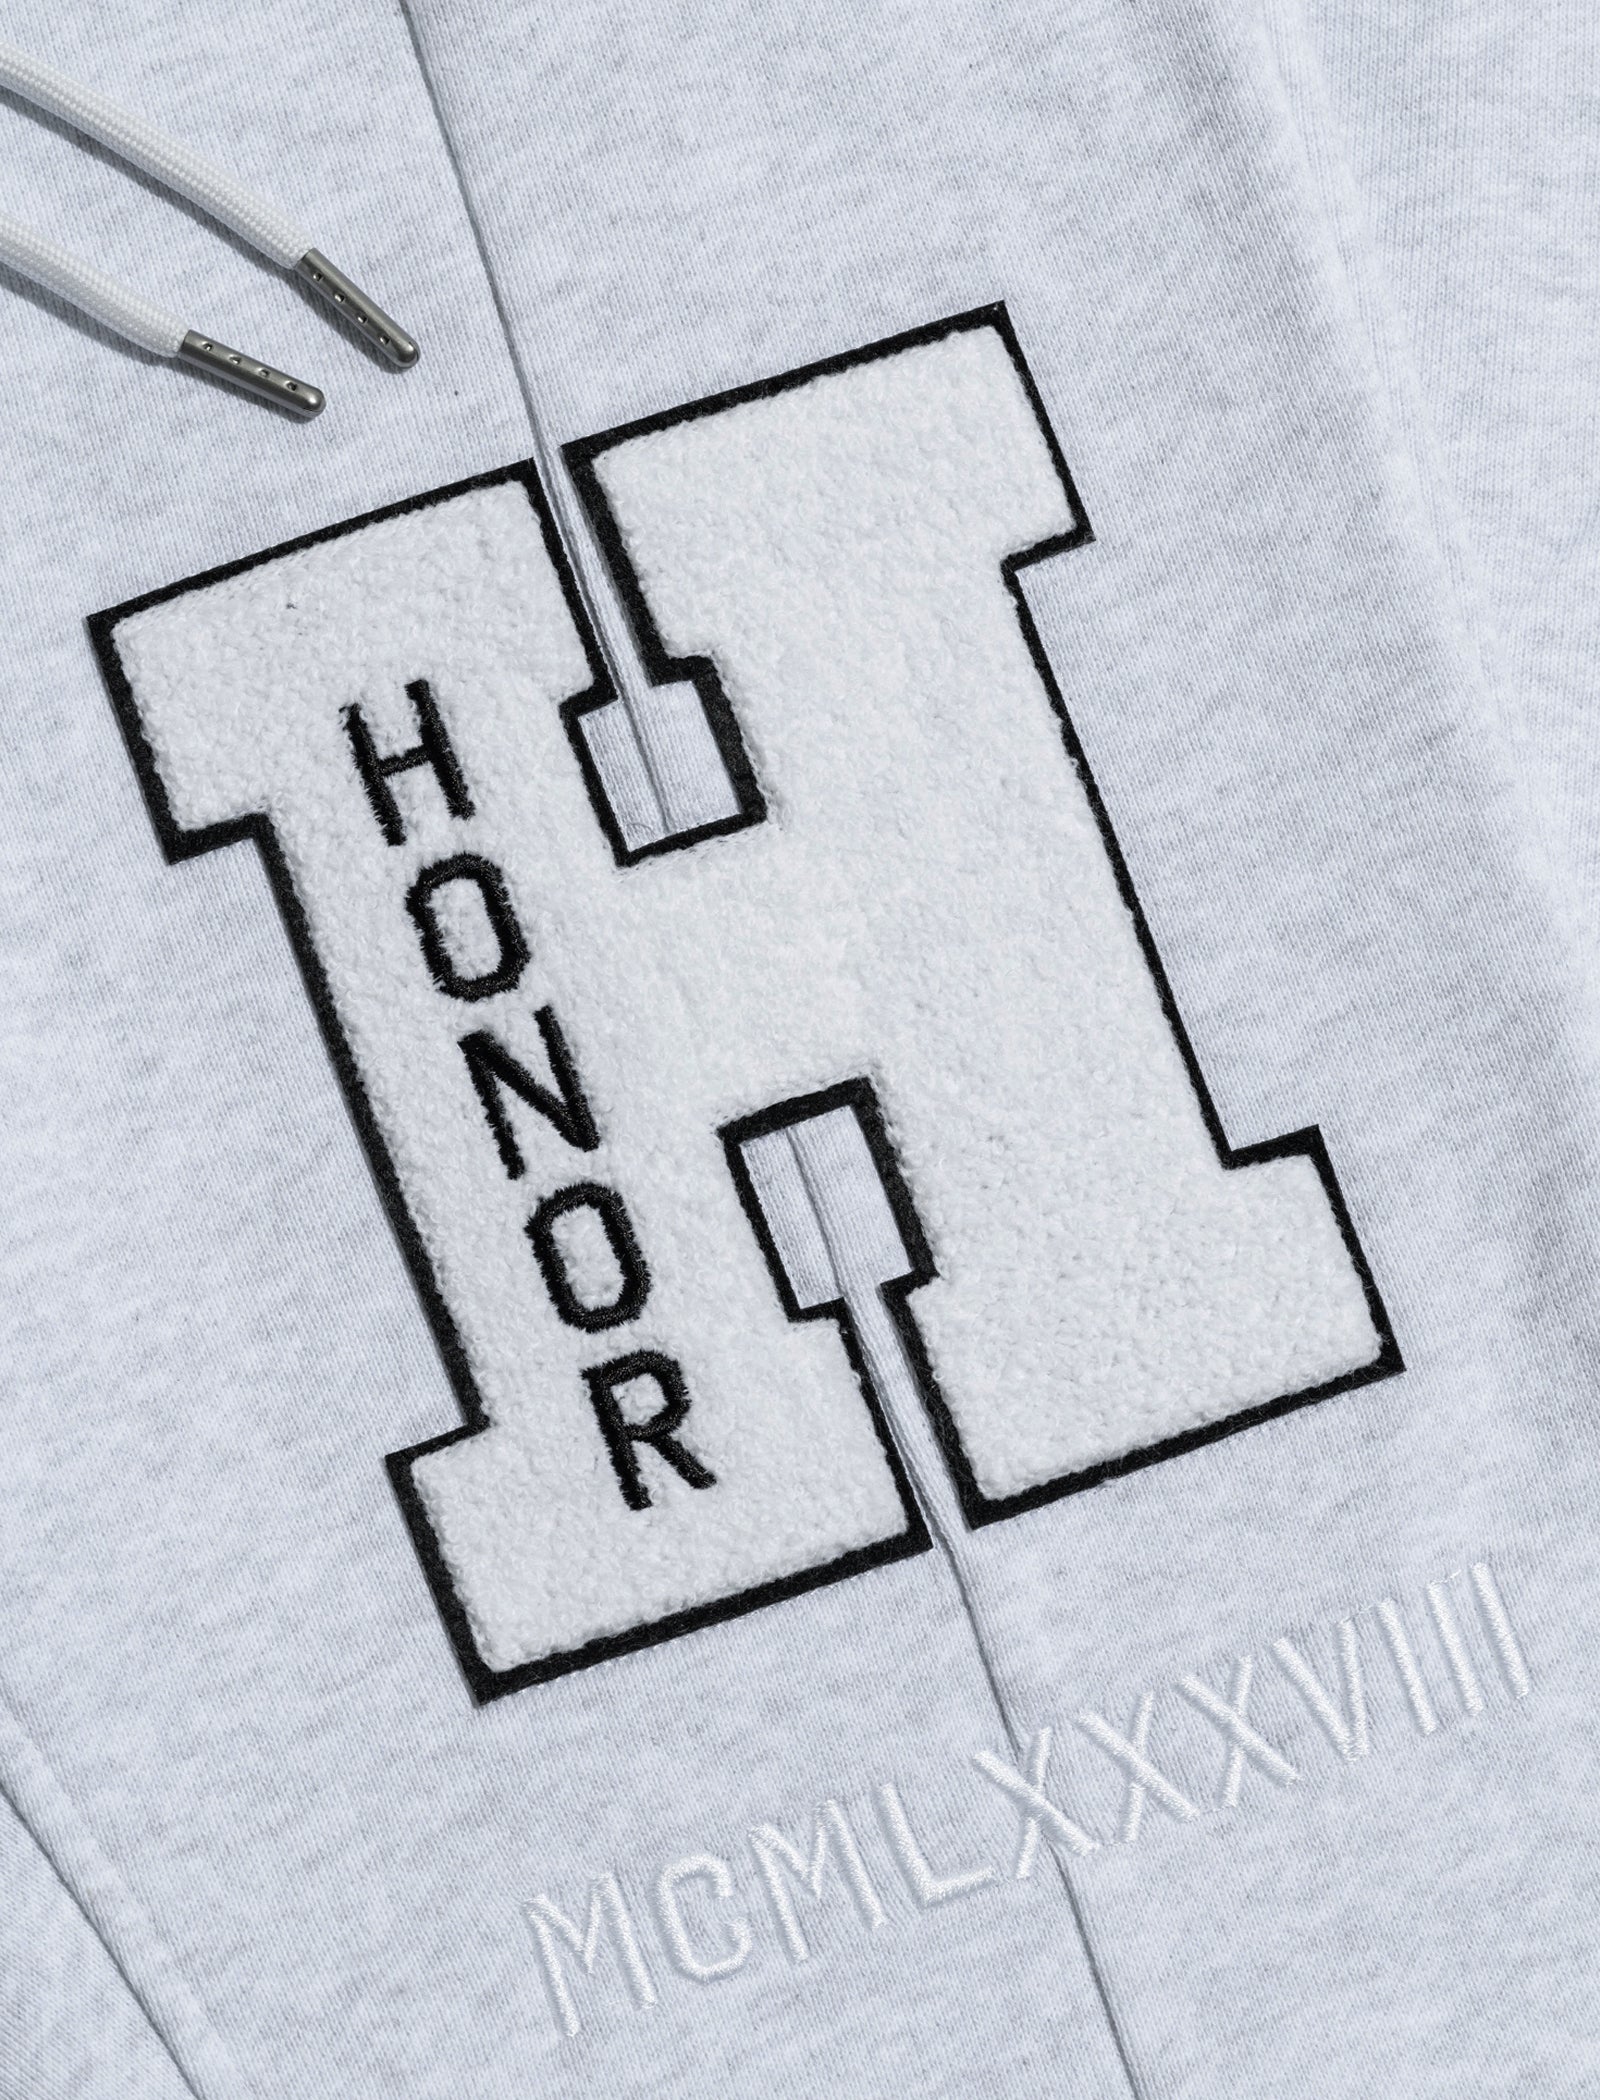 HONOR THE GIFT CAMPUS SWEATPANT